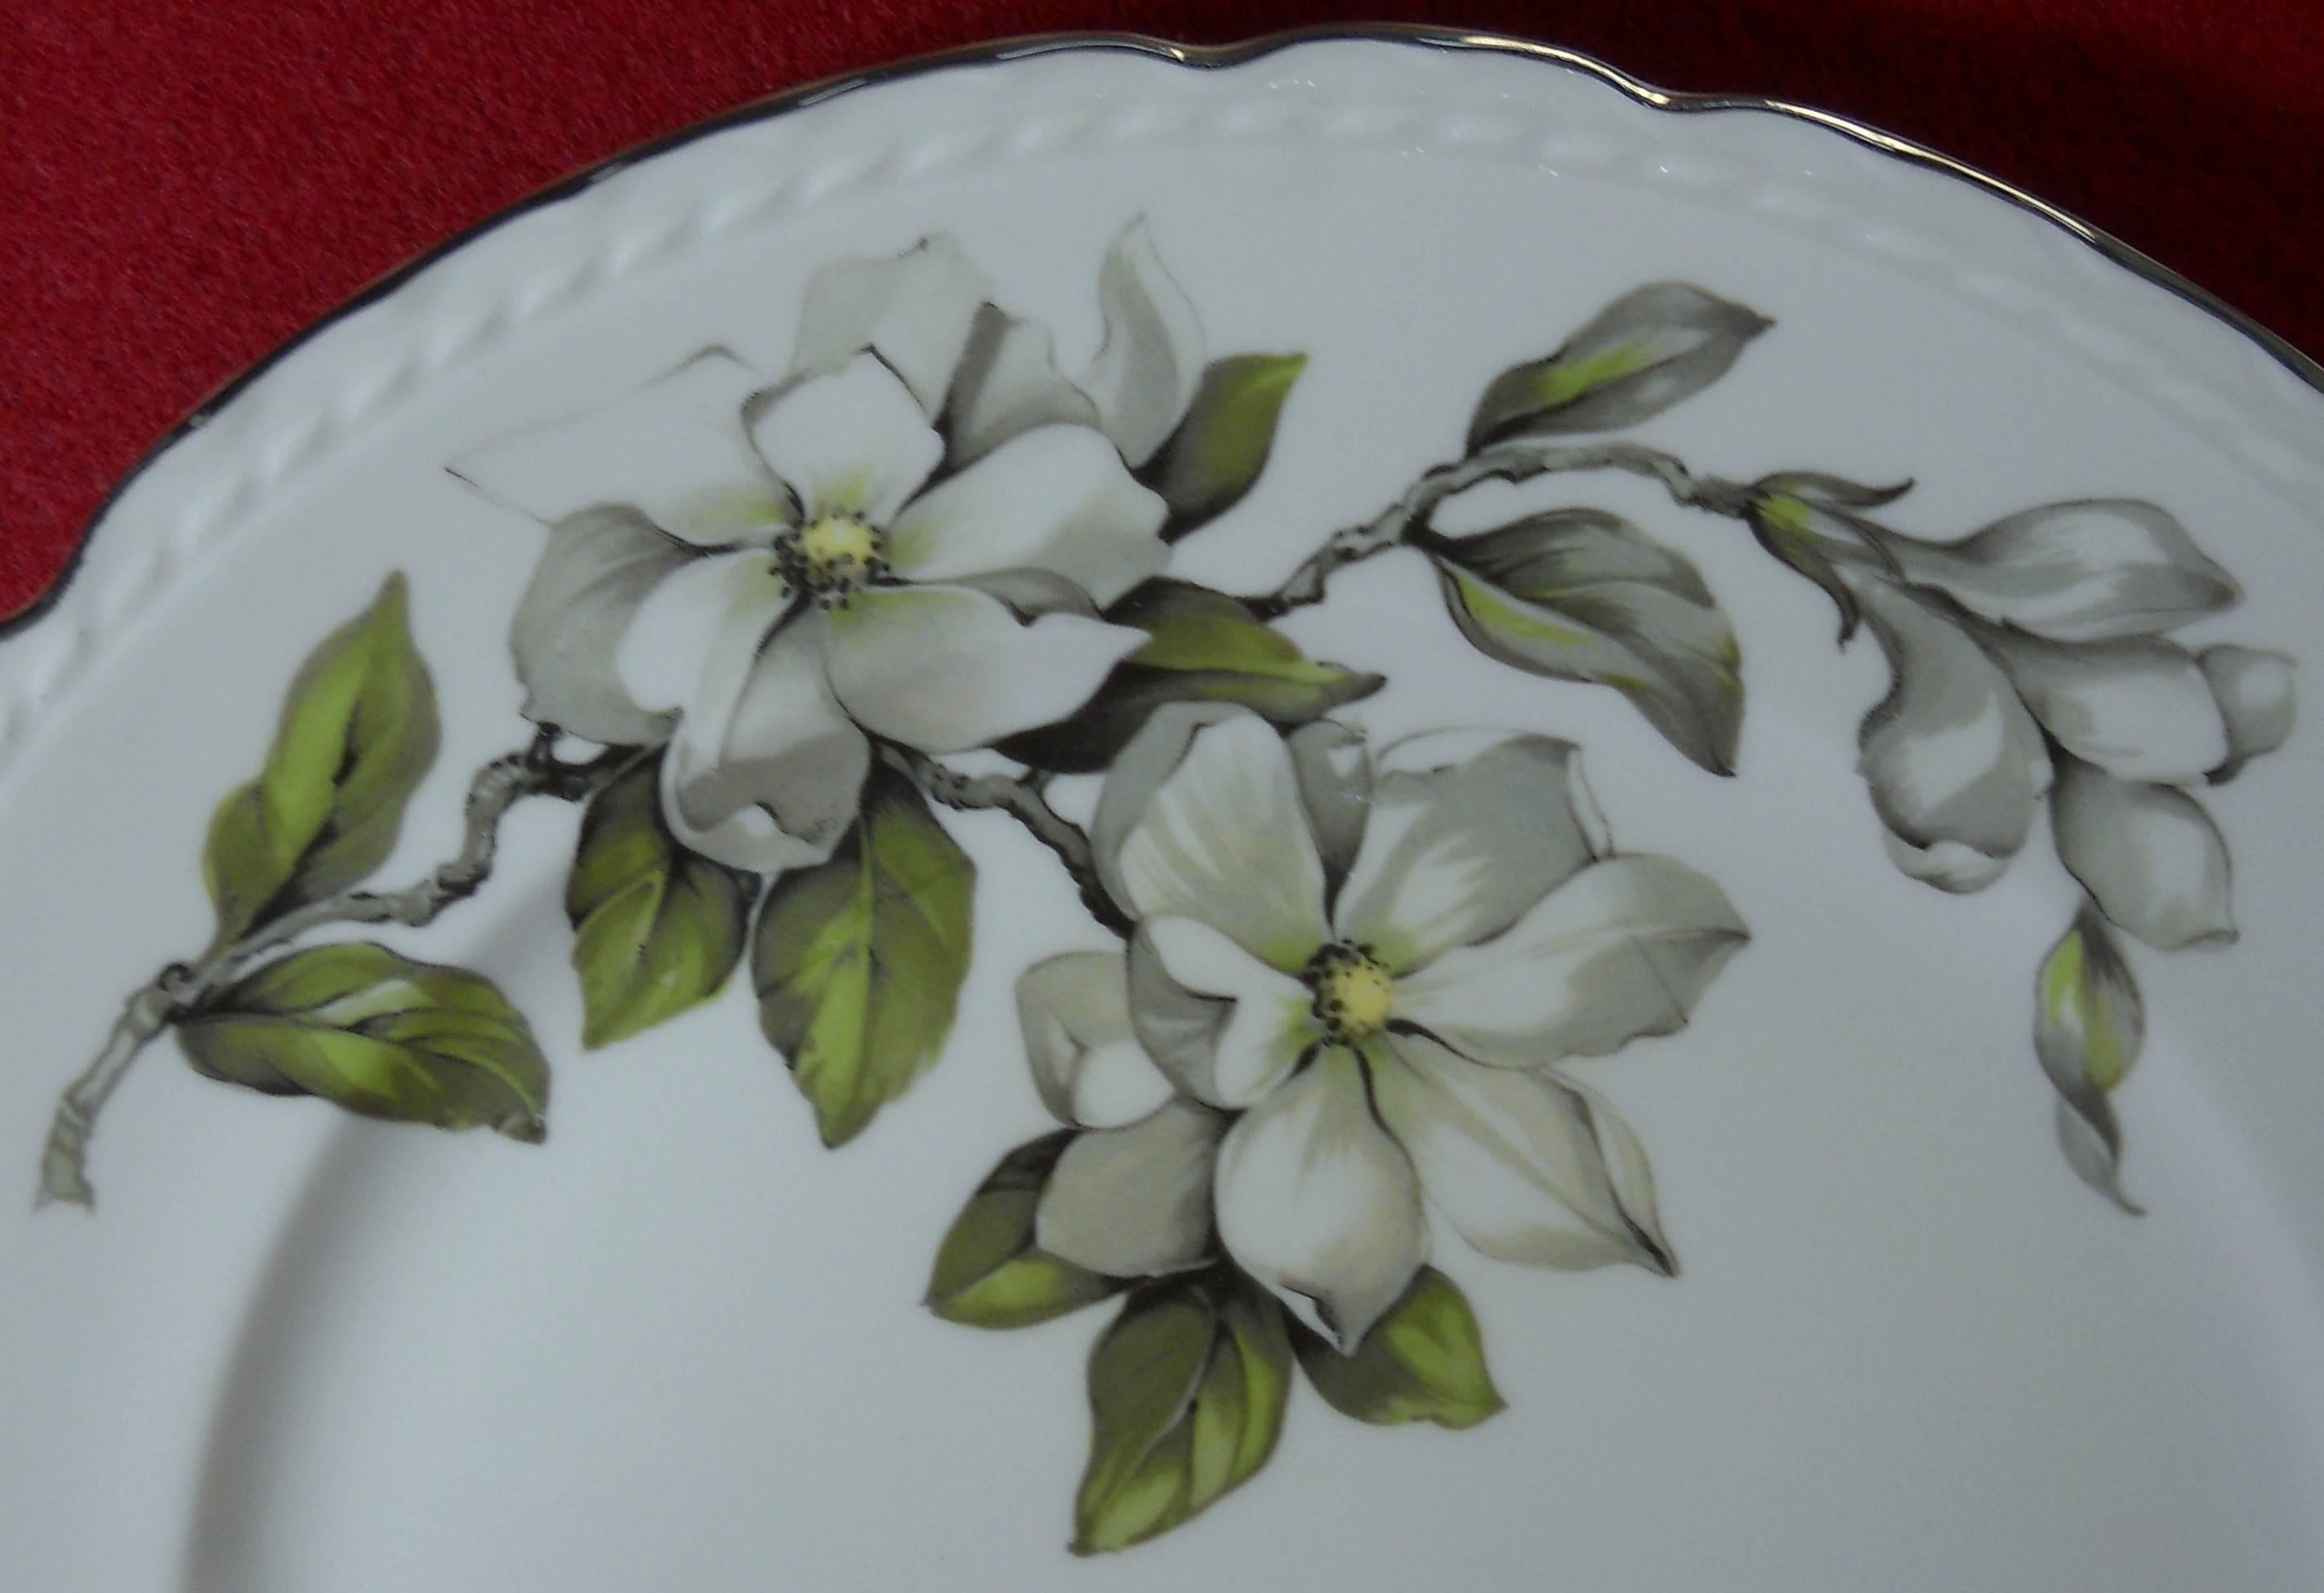 Embassy (American) china Silver Gardenia pattern 53-piece set service for eight 

in great condition free from chips, cracks, breaks or stains. Some items show minor wear.

White flowers with embossed rim. 

Includes eight cups, eight